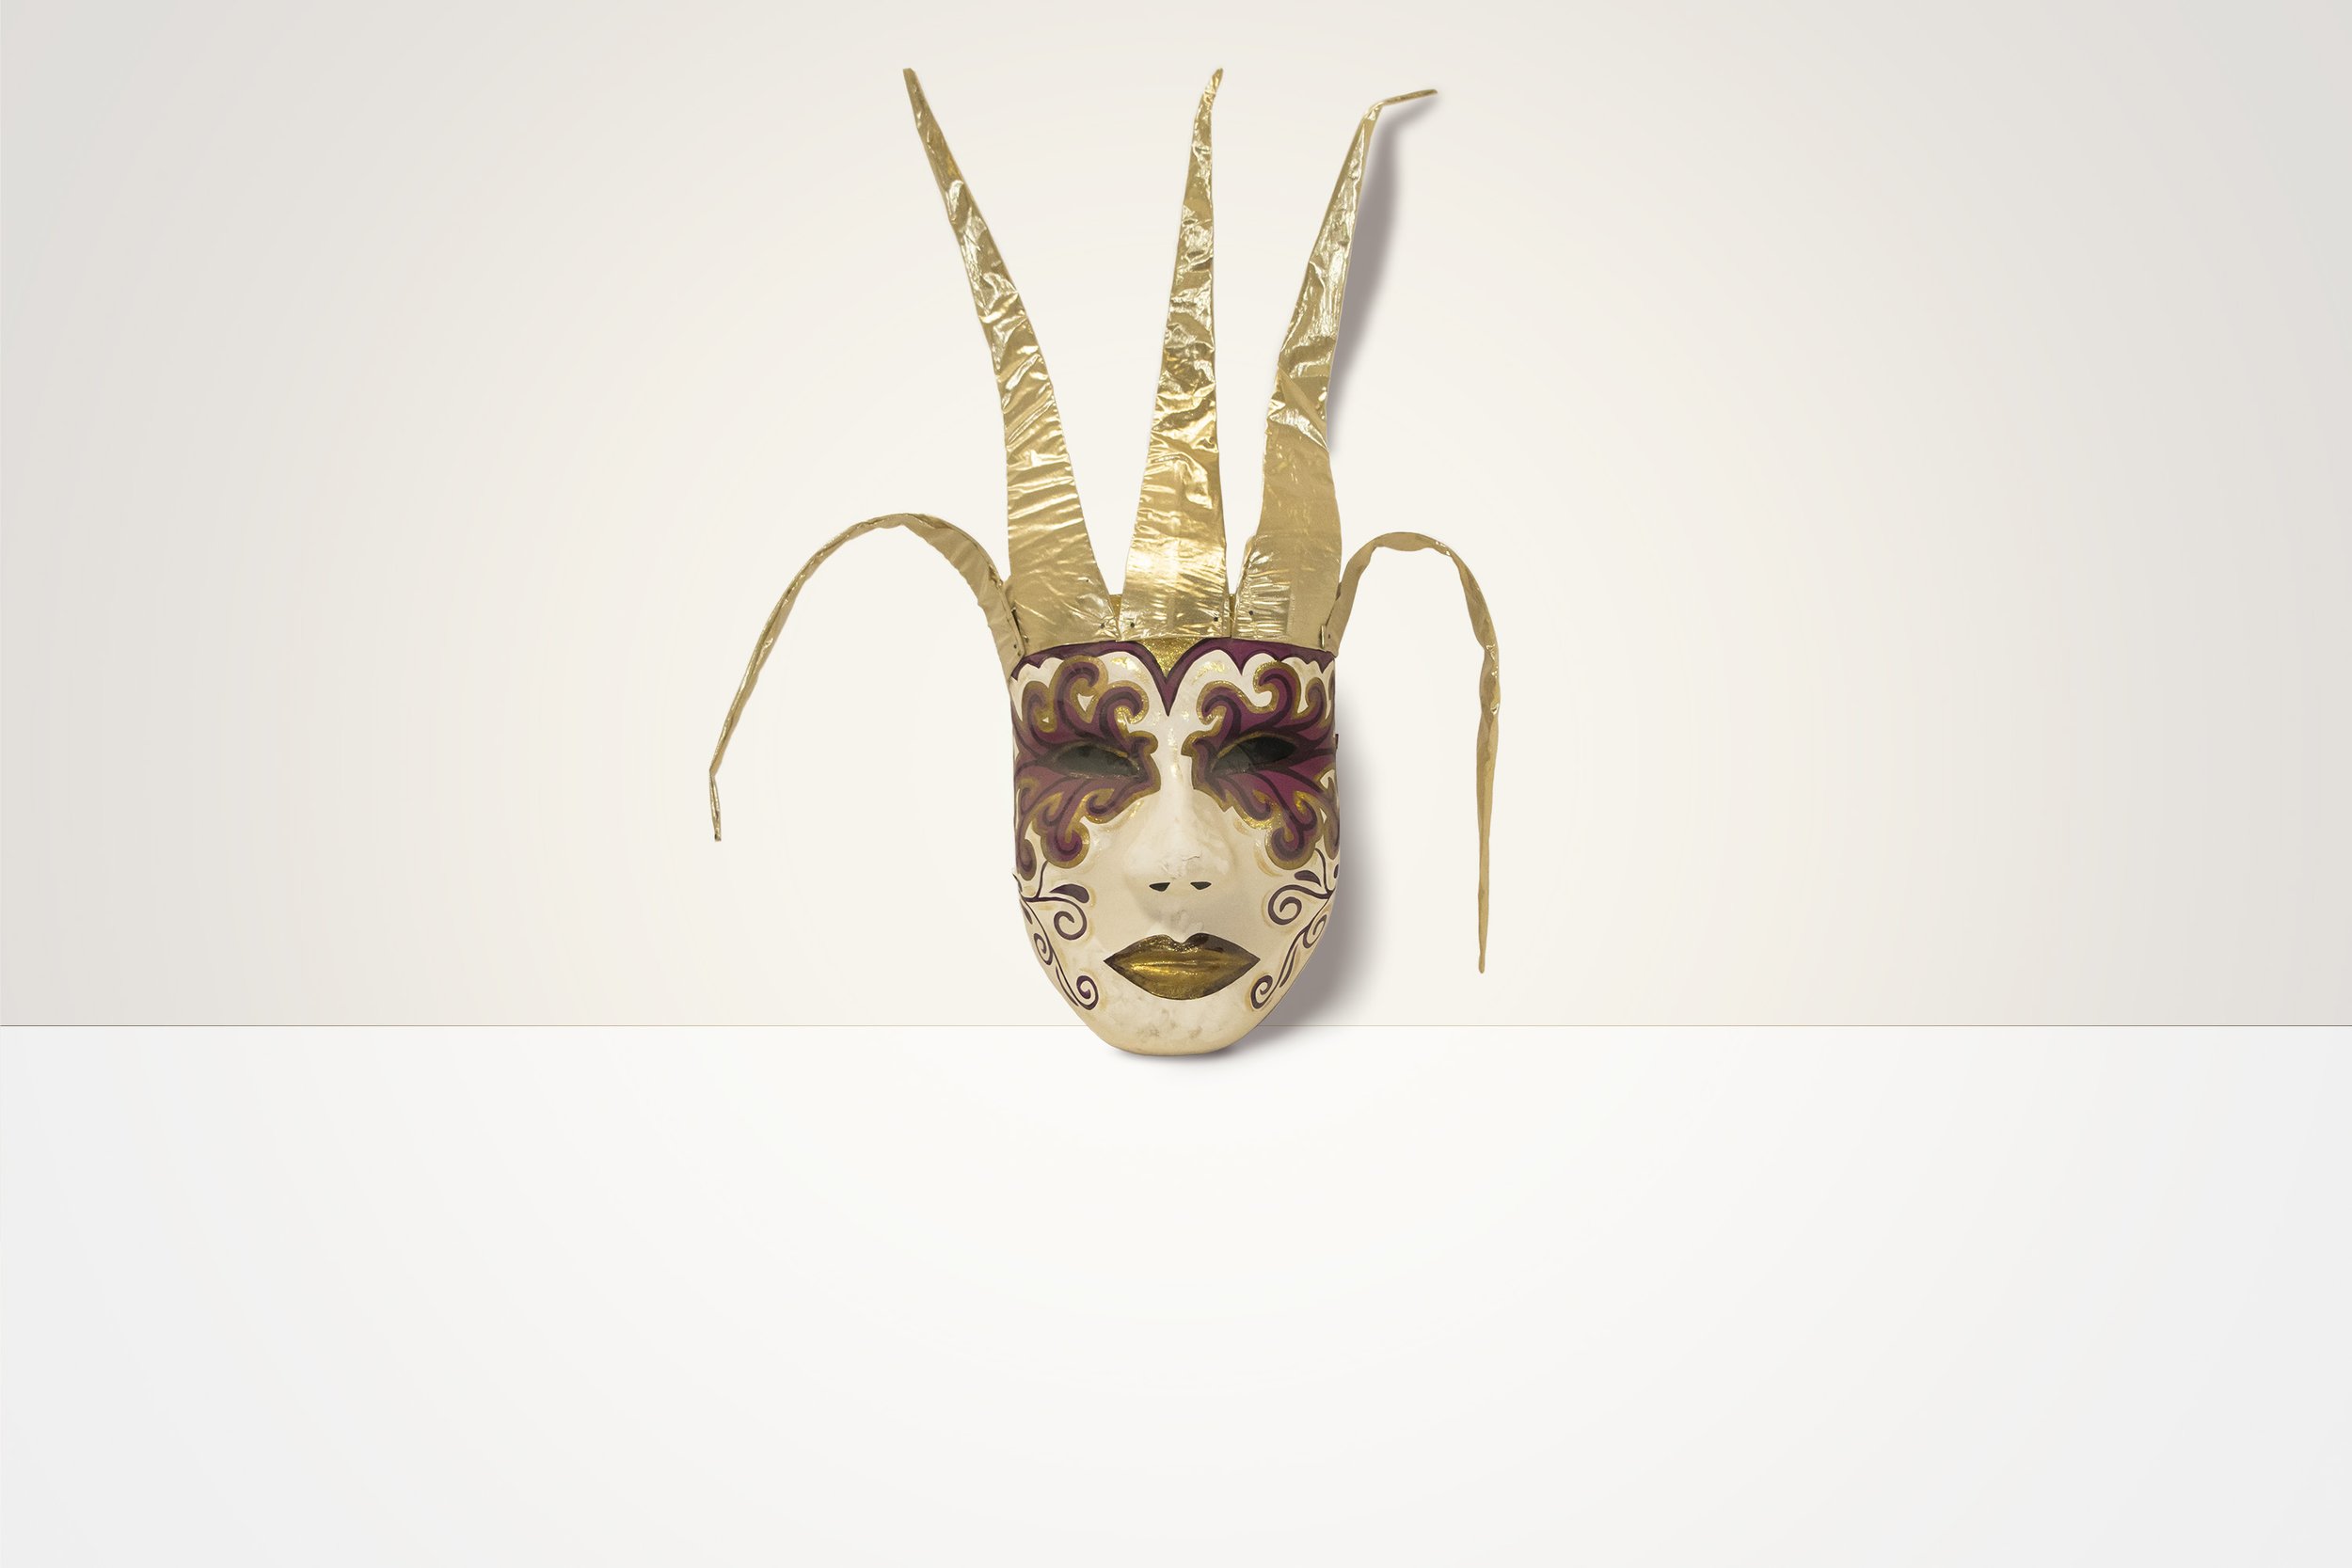 The Jester Mask